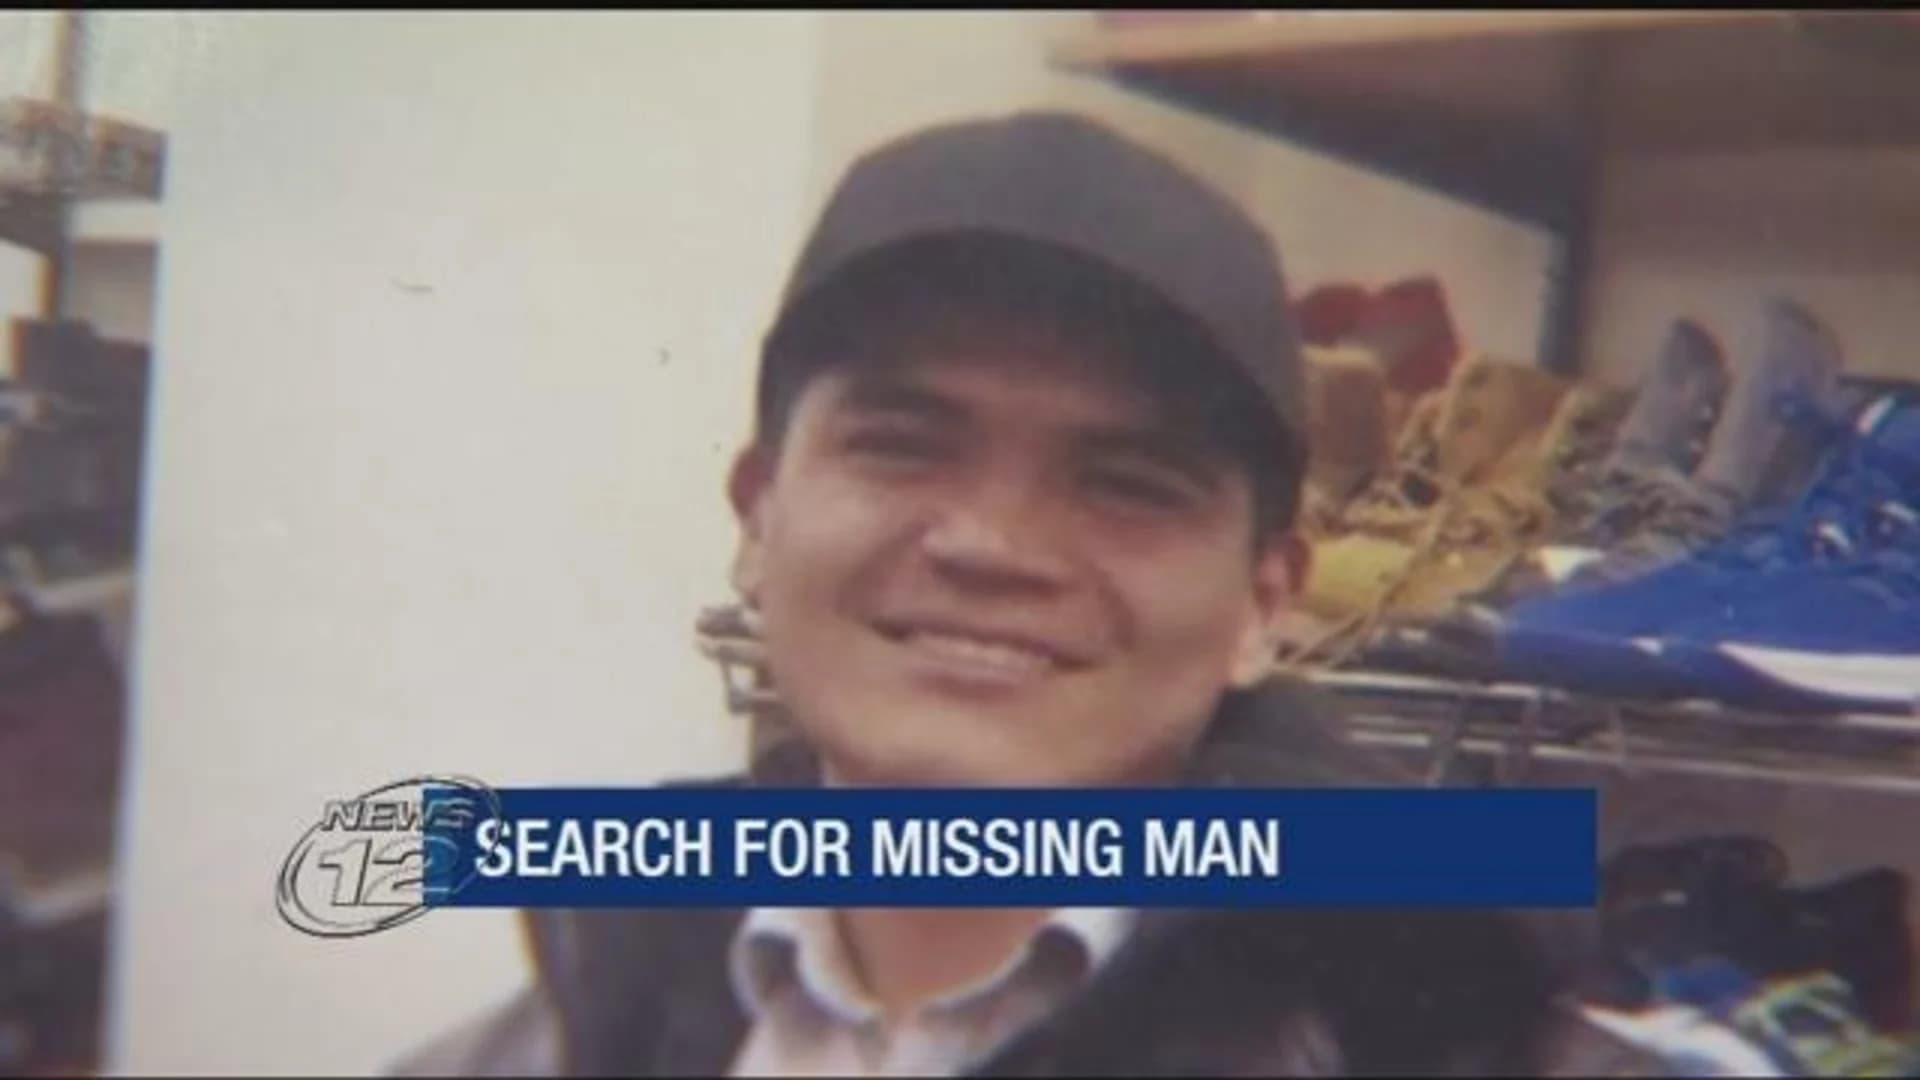 Family pleads for information on missing Yonkers day laborer